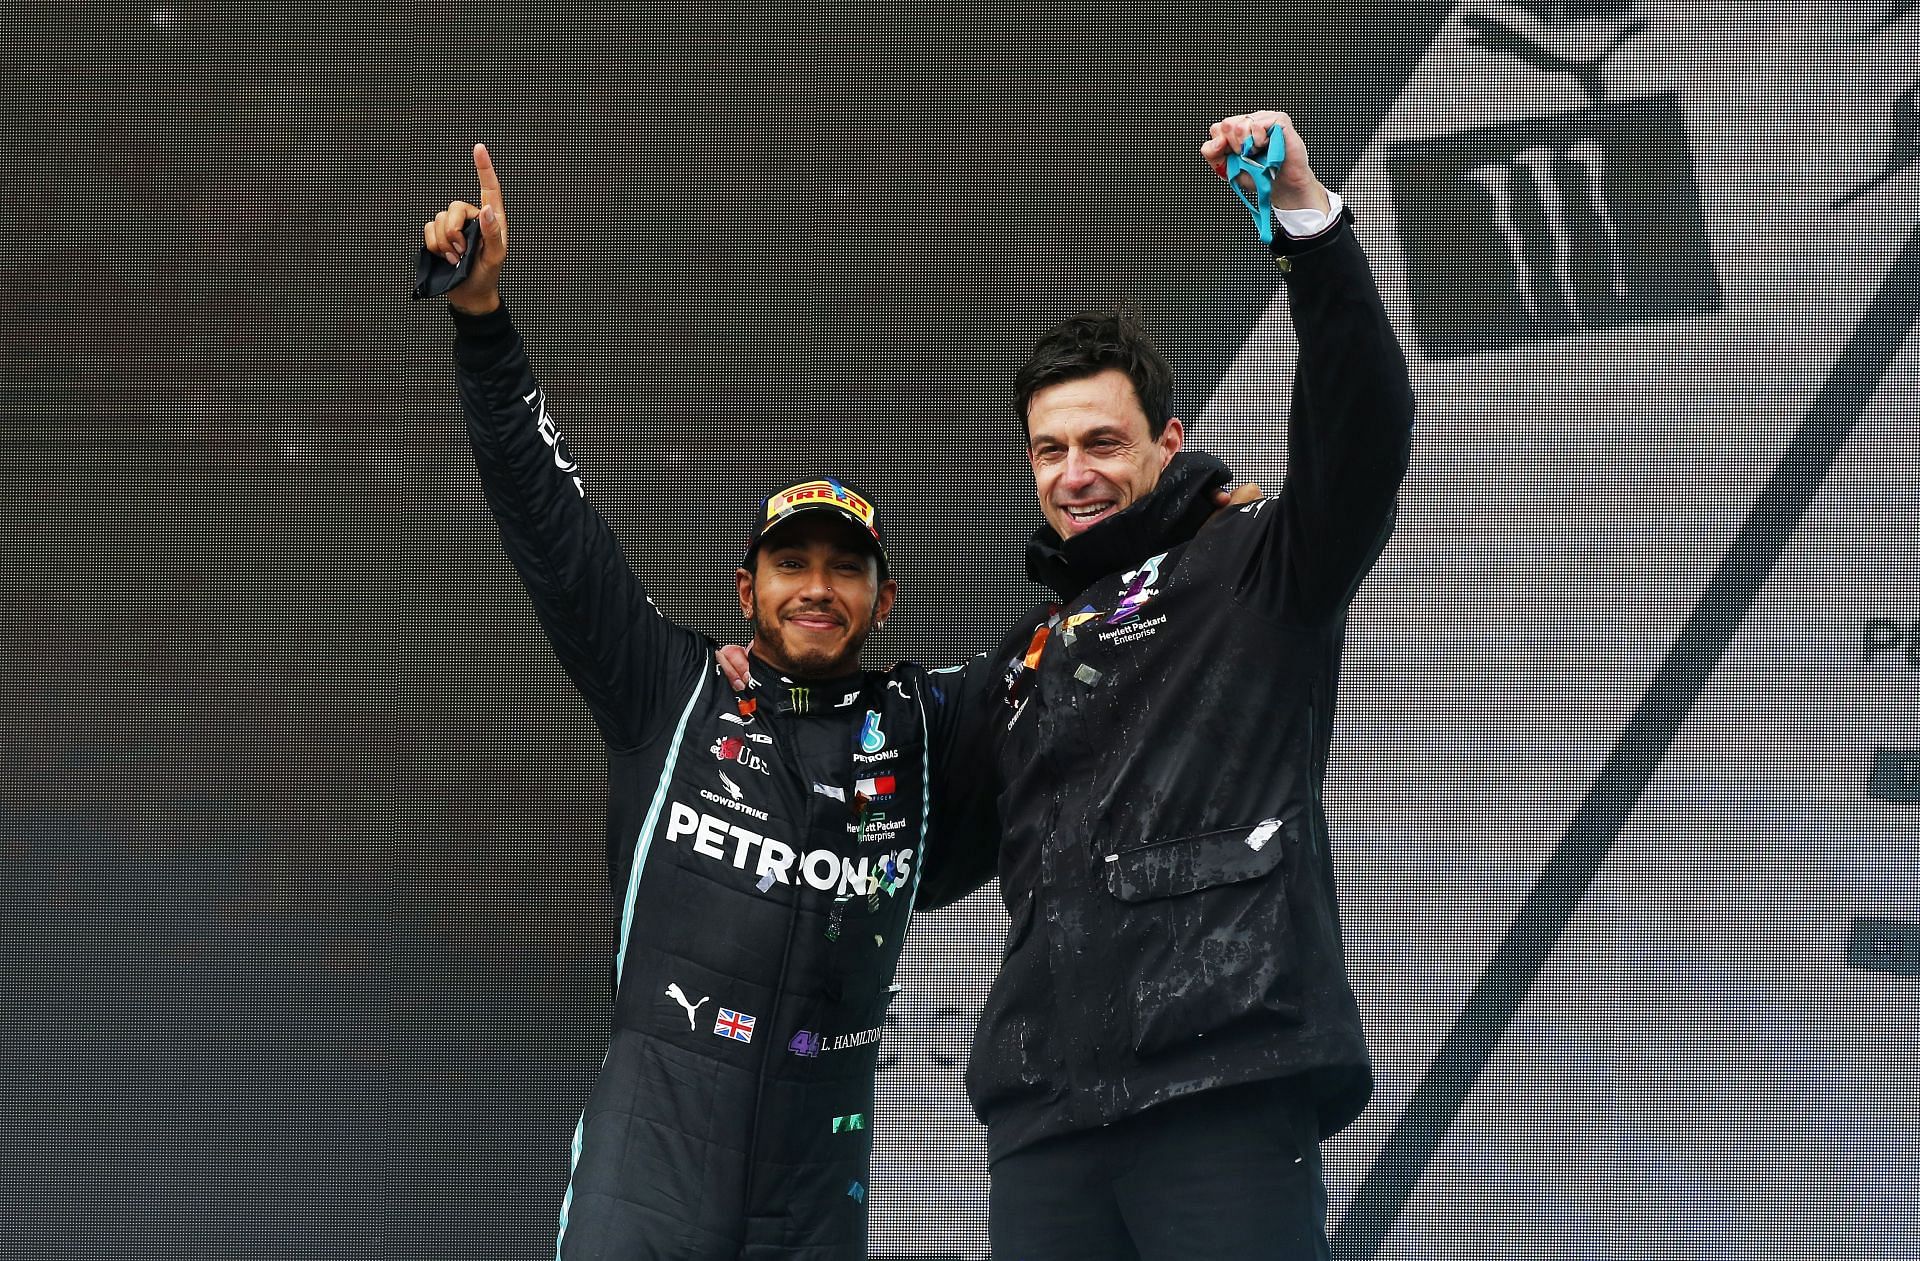 Lewis Hamilton (left) and Toto Wolff (right) at the 2020 Turkish Grand Prix (Photo by Kenan Asyali - Pool/Getty Images)